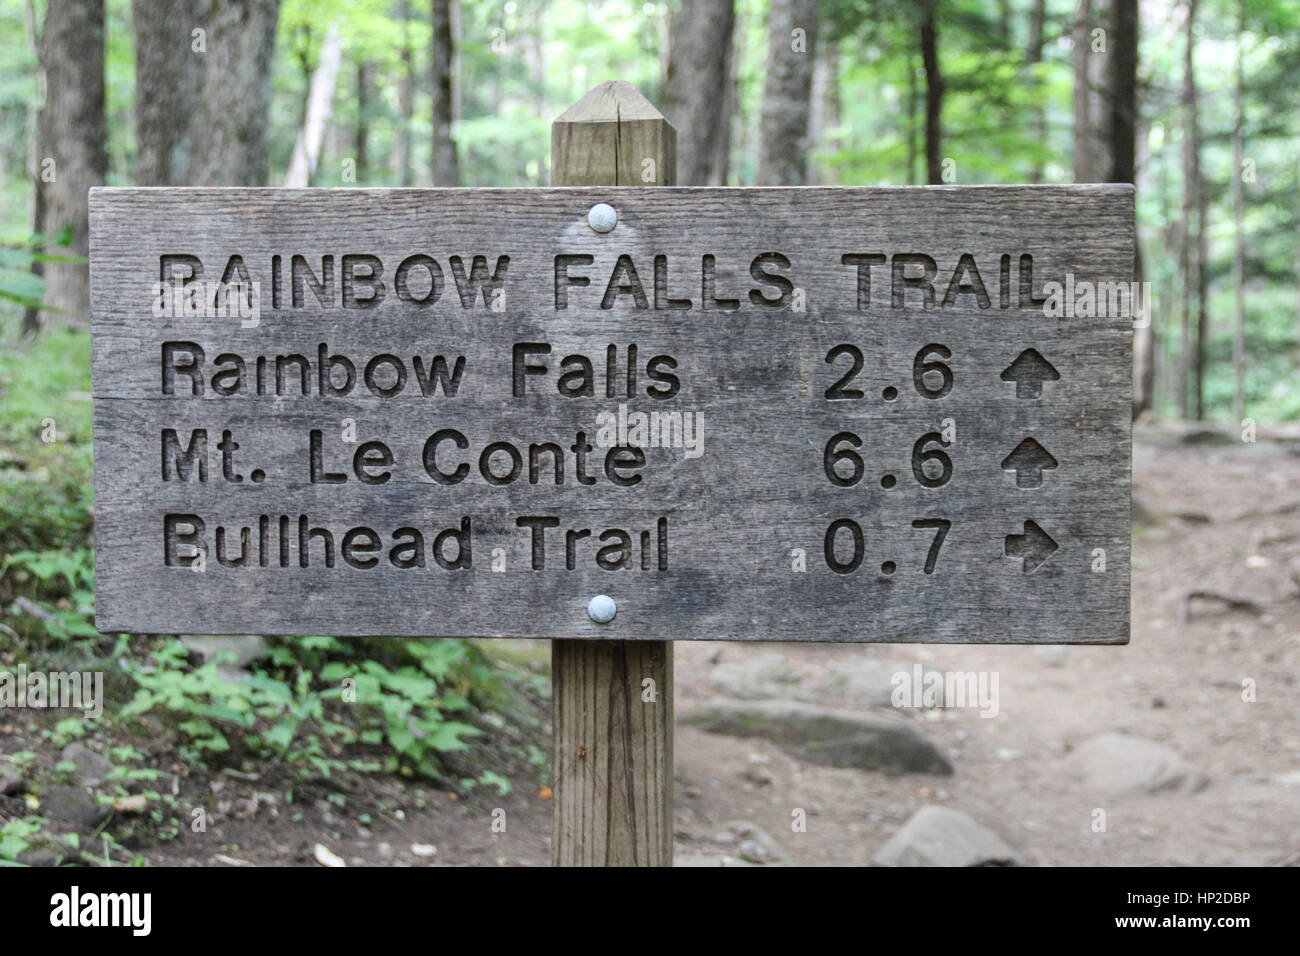 Rainbow Falls Trail sign in Smoky Mountains National Park Stock Photo